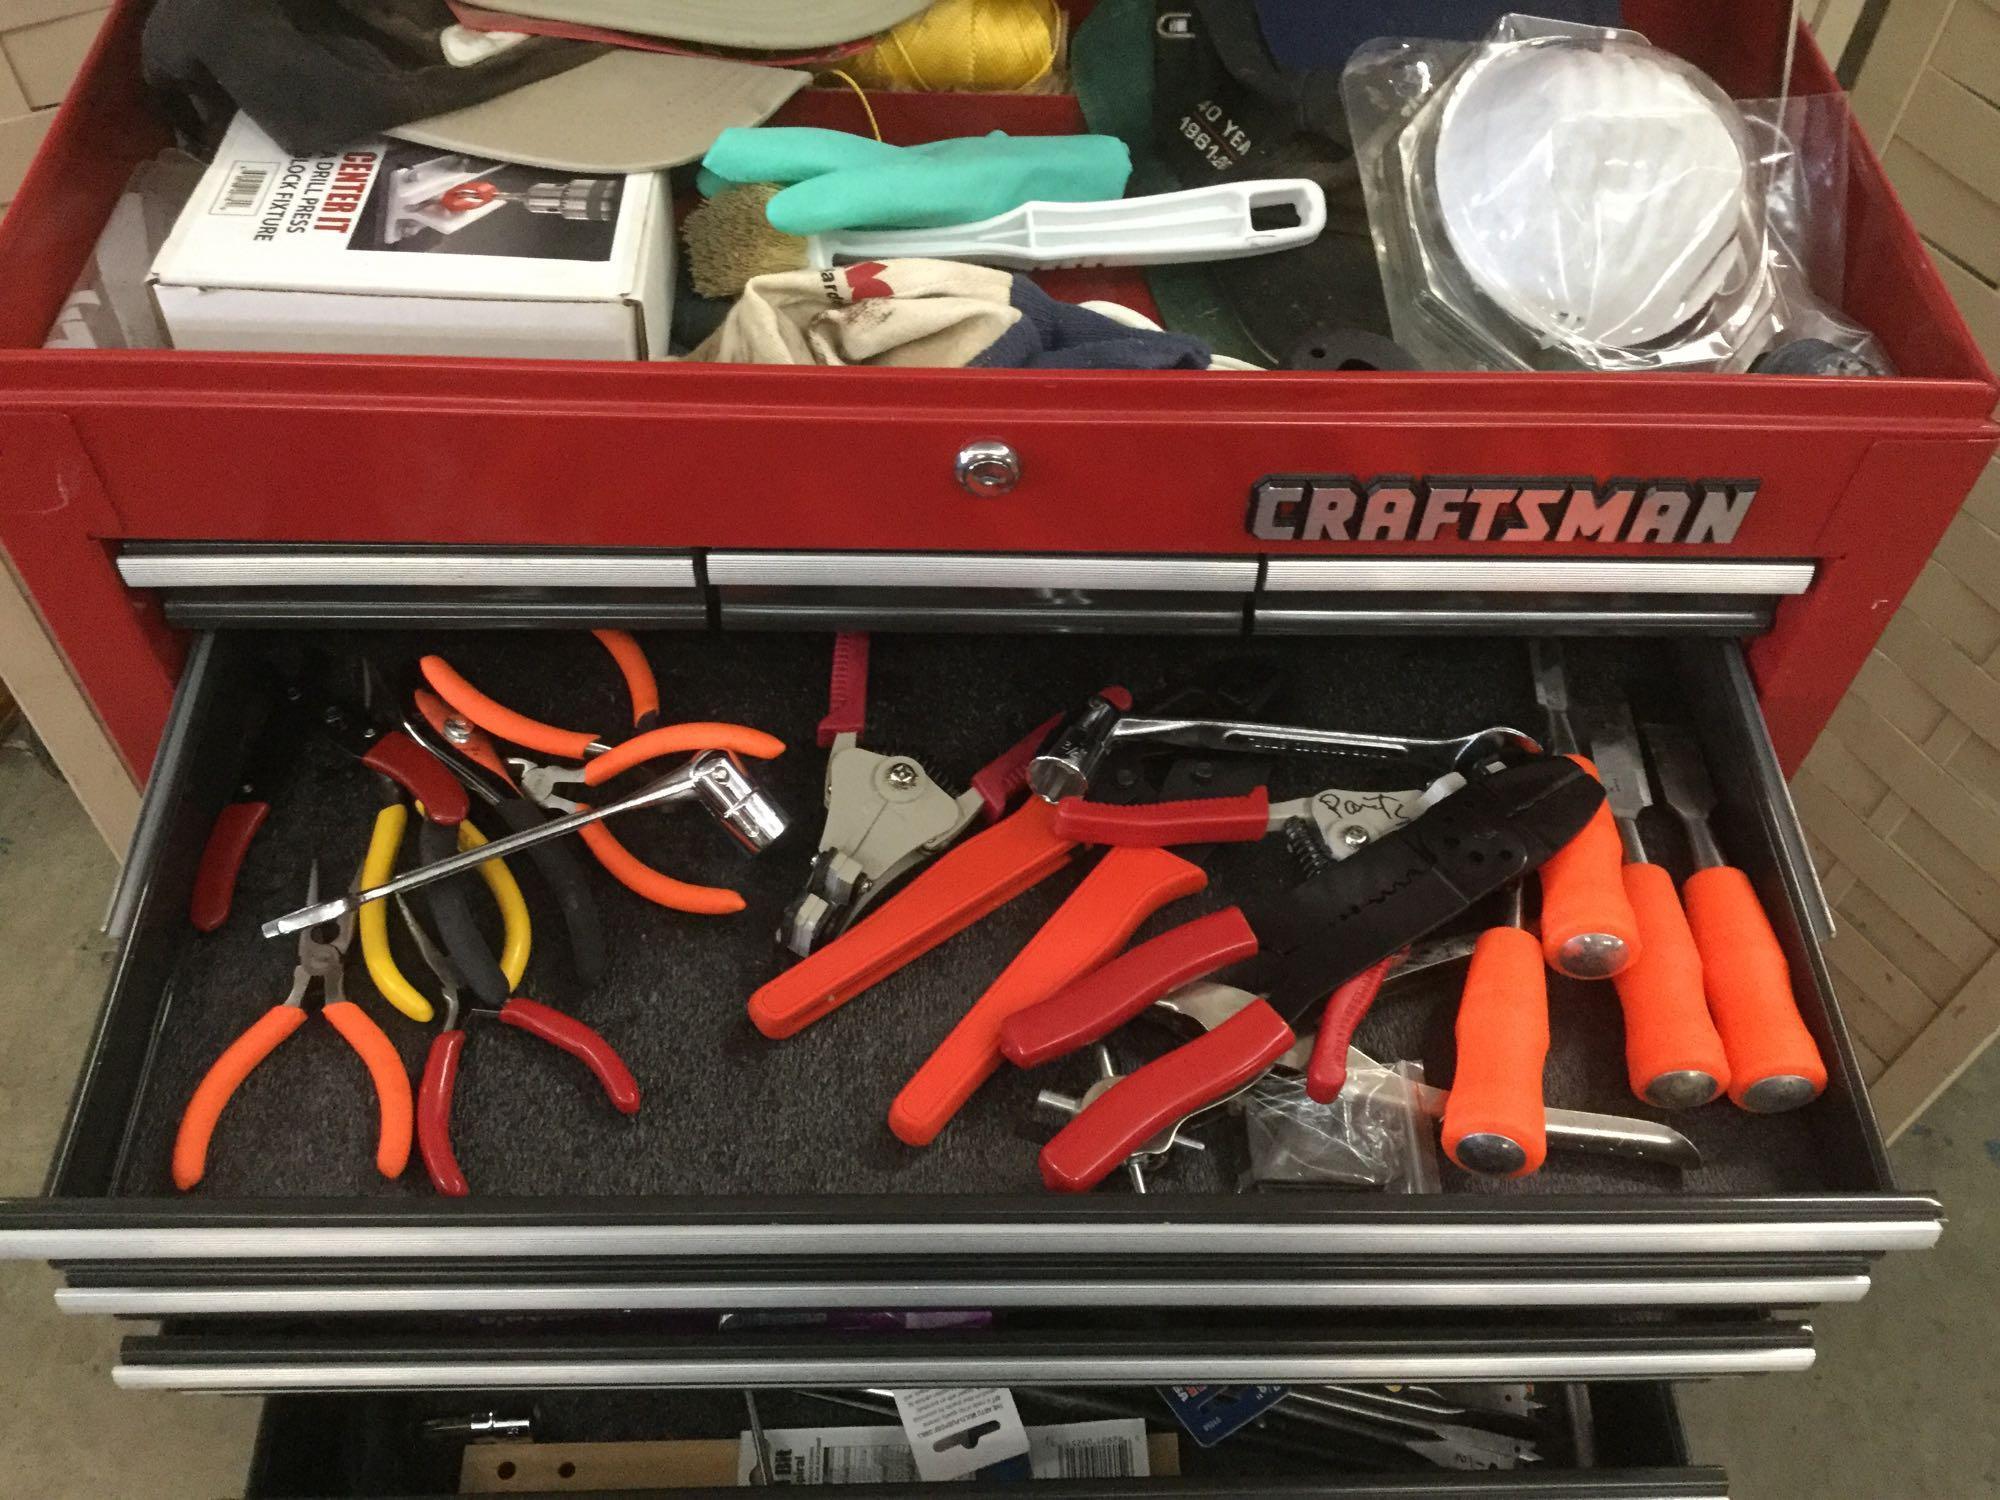 2 pc Craftsman locking rolling tool chest - 13 drawers filled with misc hand tool sets and more